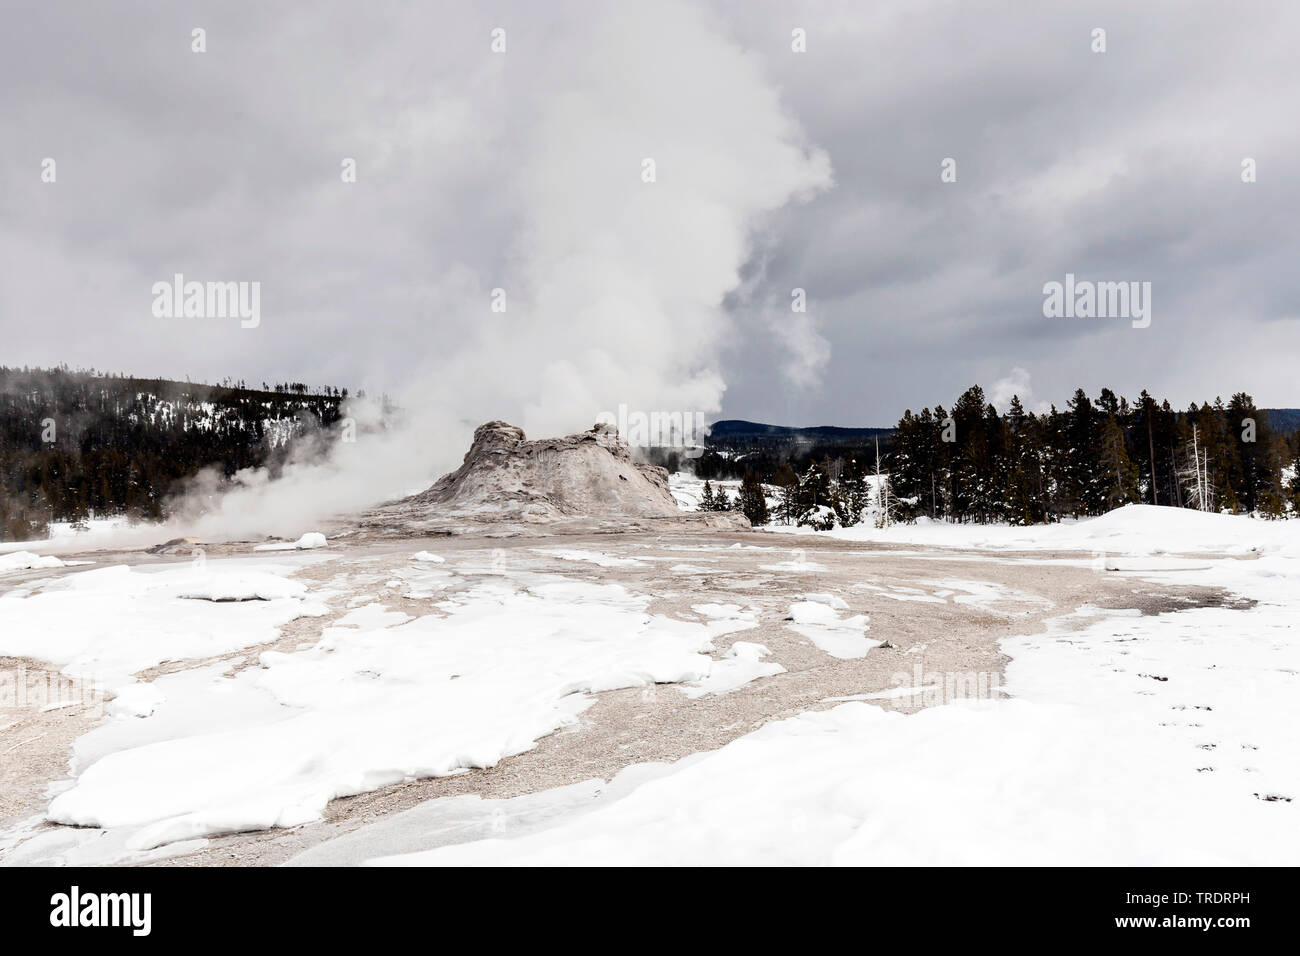 Old Faithful Geyser dans la neige, USA, Wyoming, Yellowstone National Park Banque D'Images